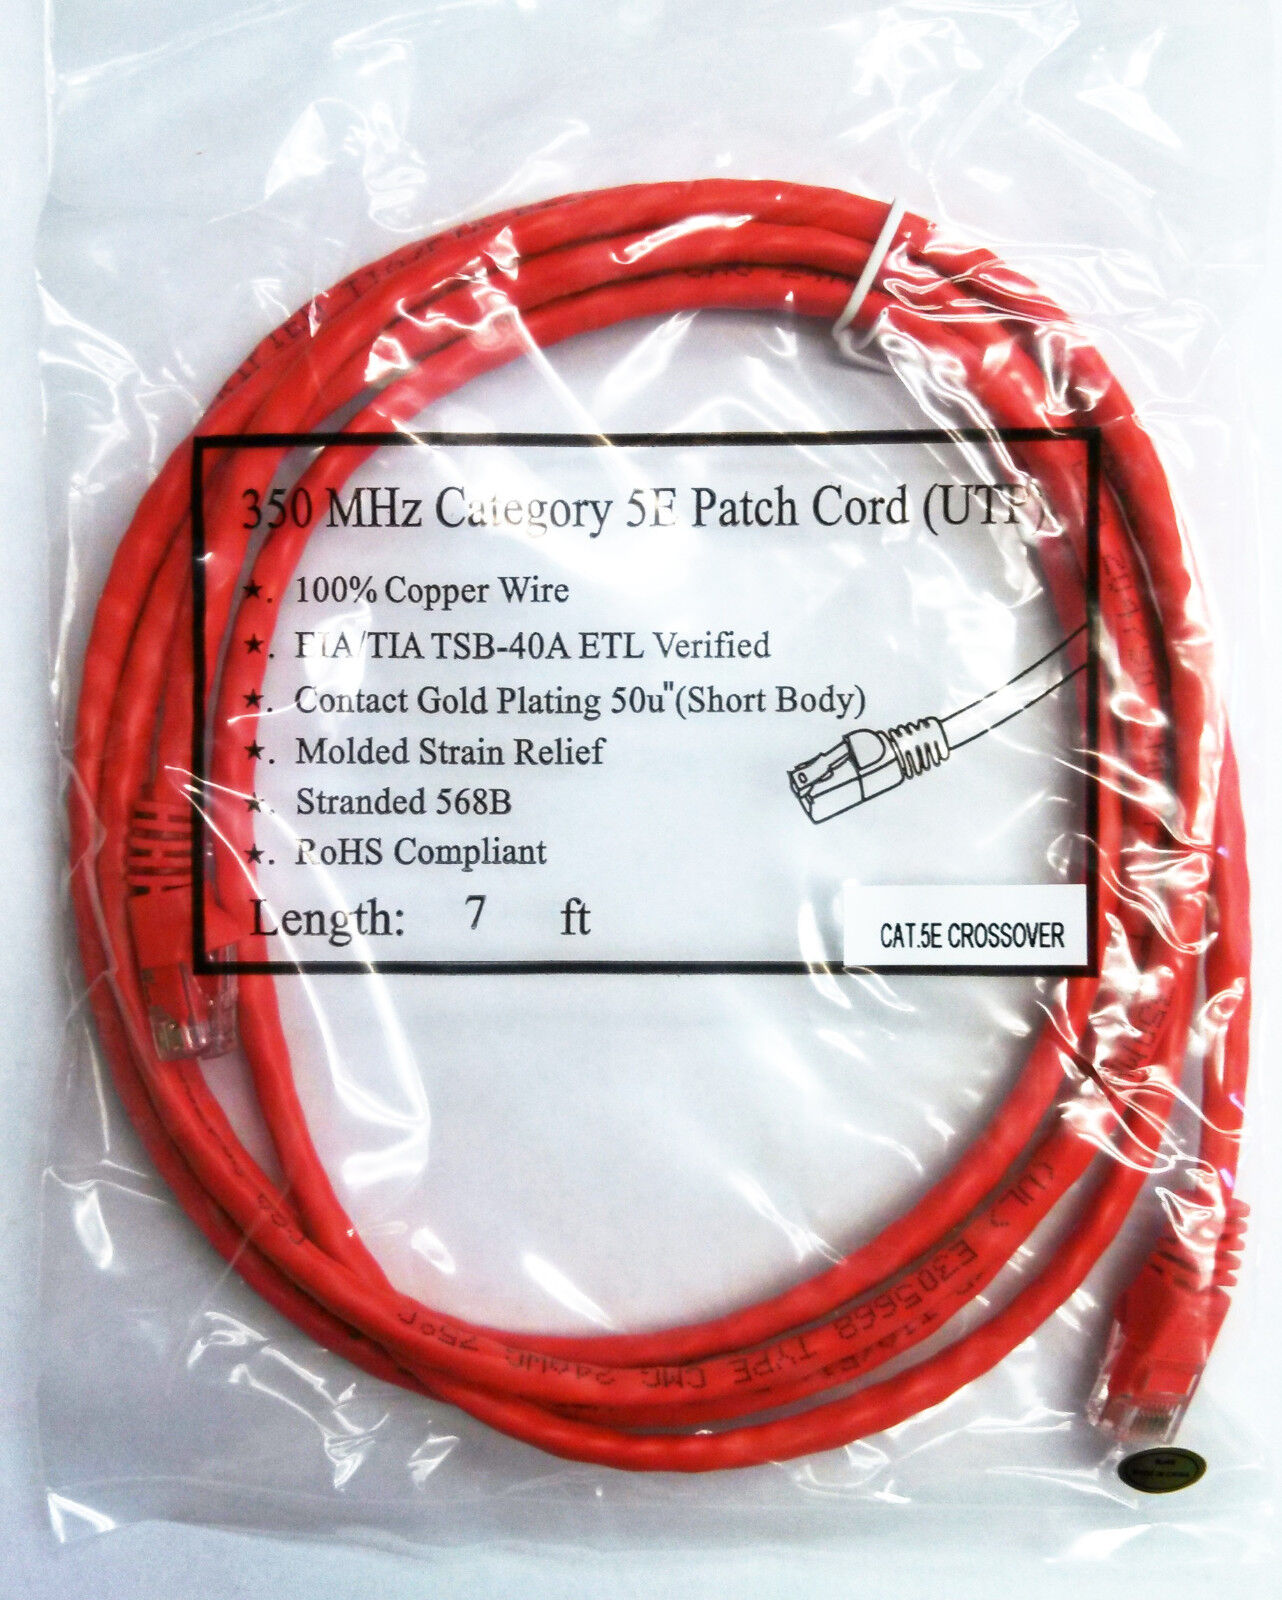 7' Foot Red, Cross Connect Cable, Cross Over, 350MHz, Cat 5e, 568B, Snagless NEW